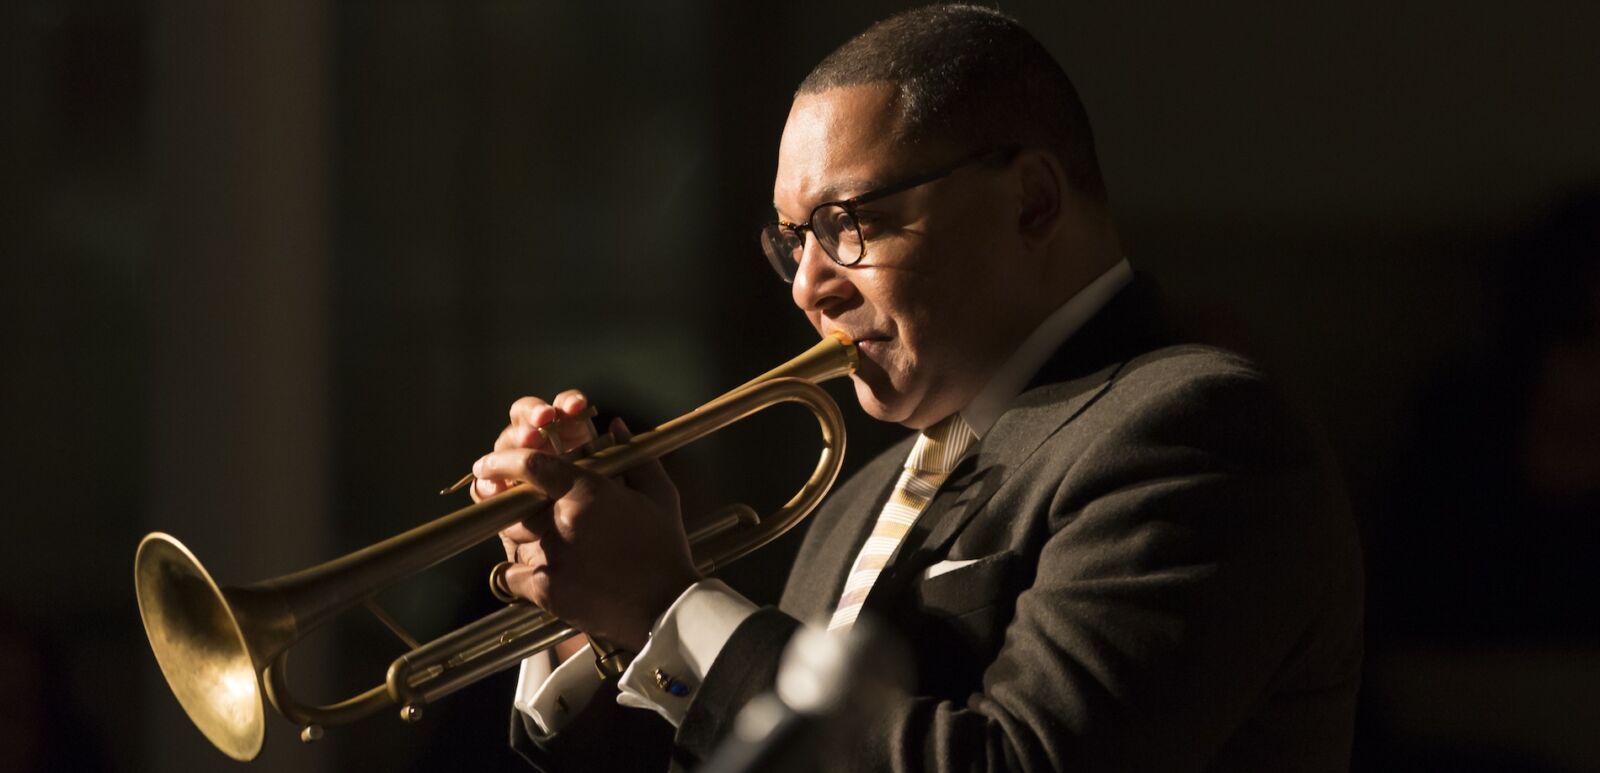 Wynton Marsalis plays trumpet at charity concert Jazz Legends for Disability Pride during Winter Jazz festival at Quaker Friends Meeting Hall. Photo via Shutterstock.